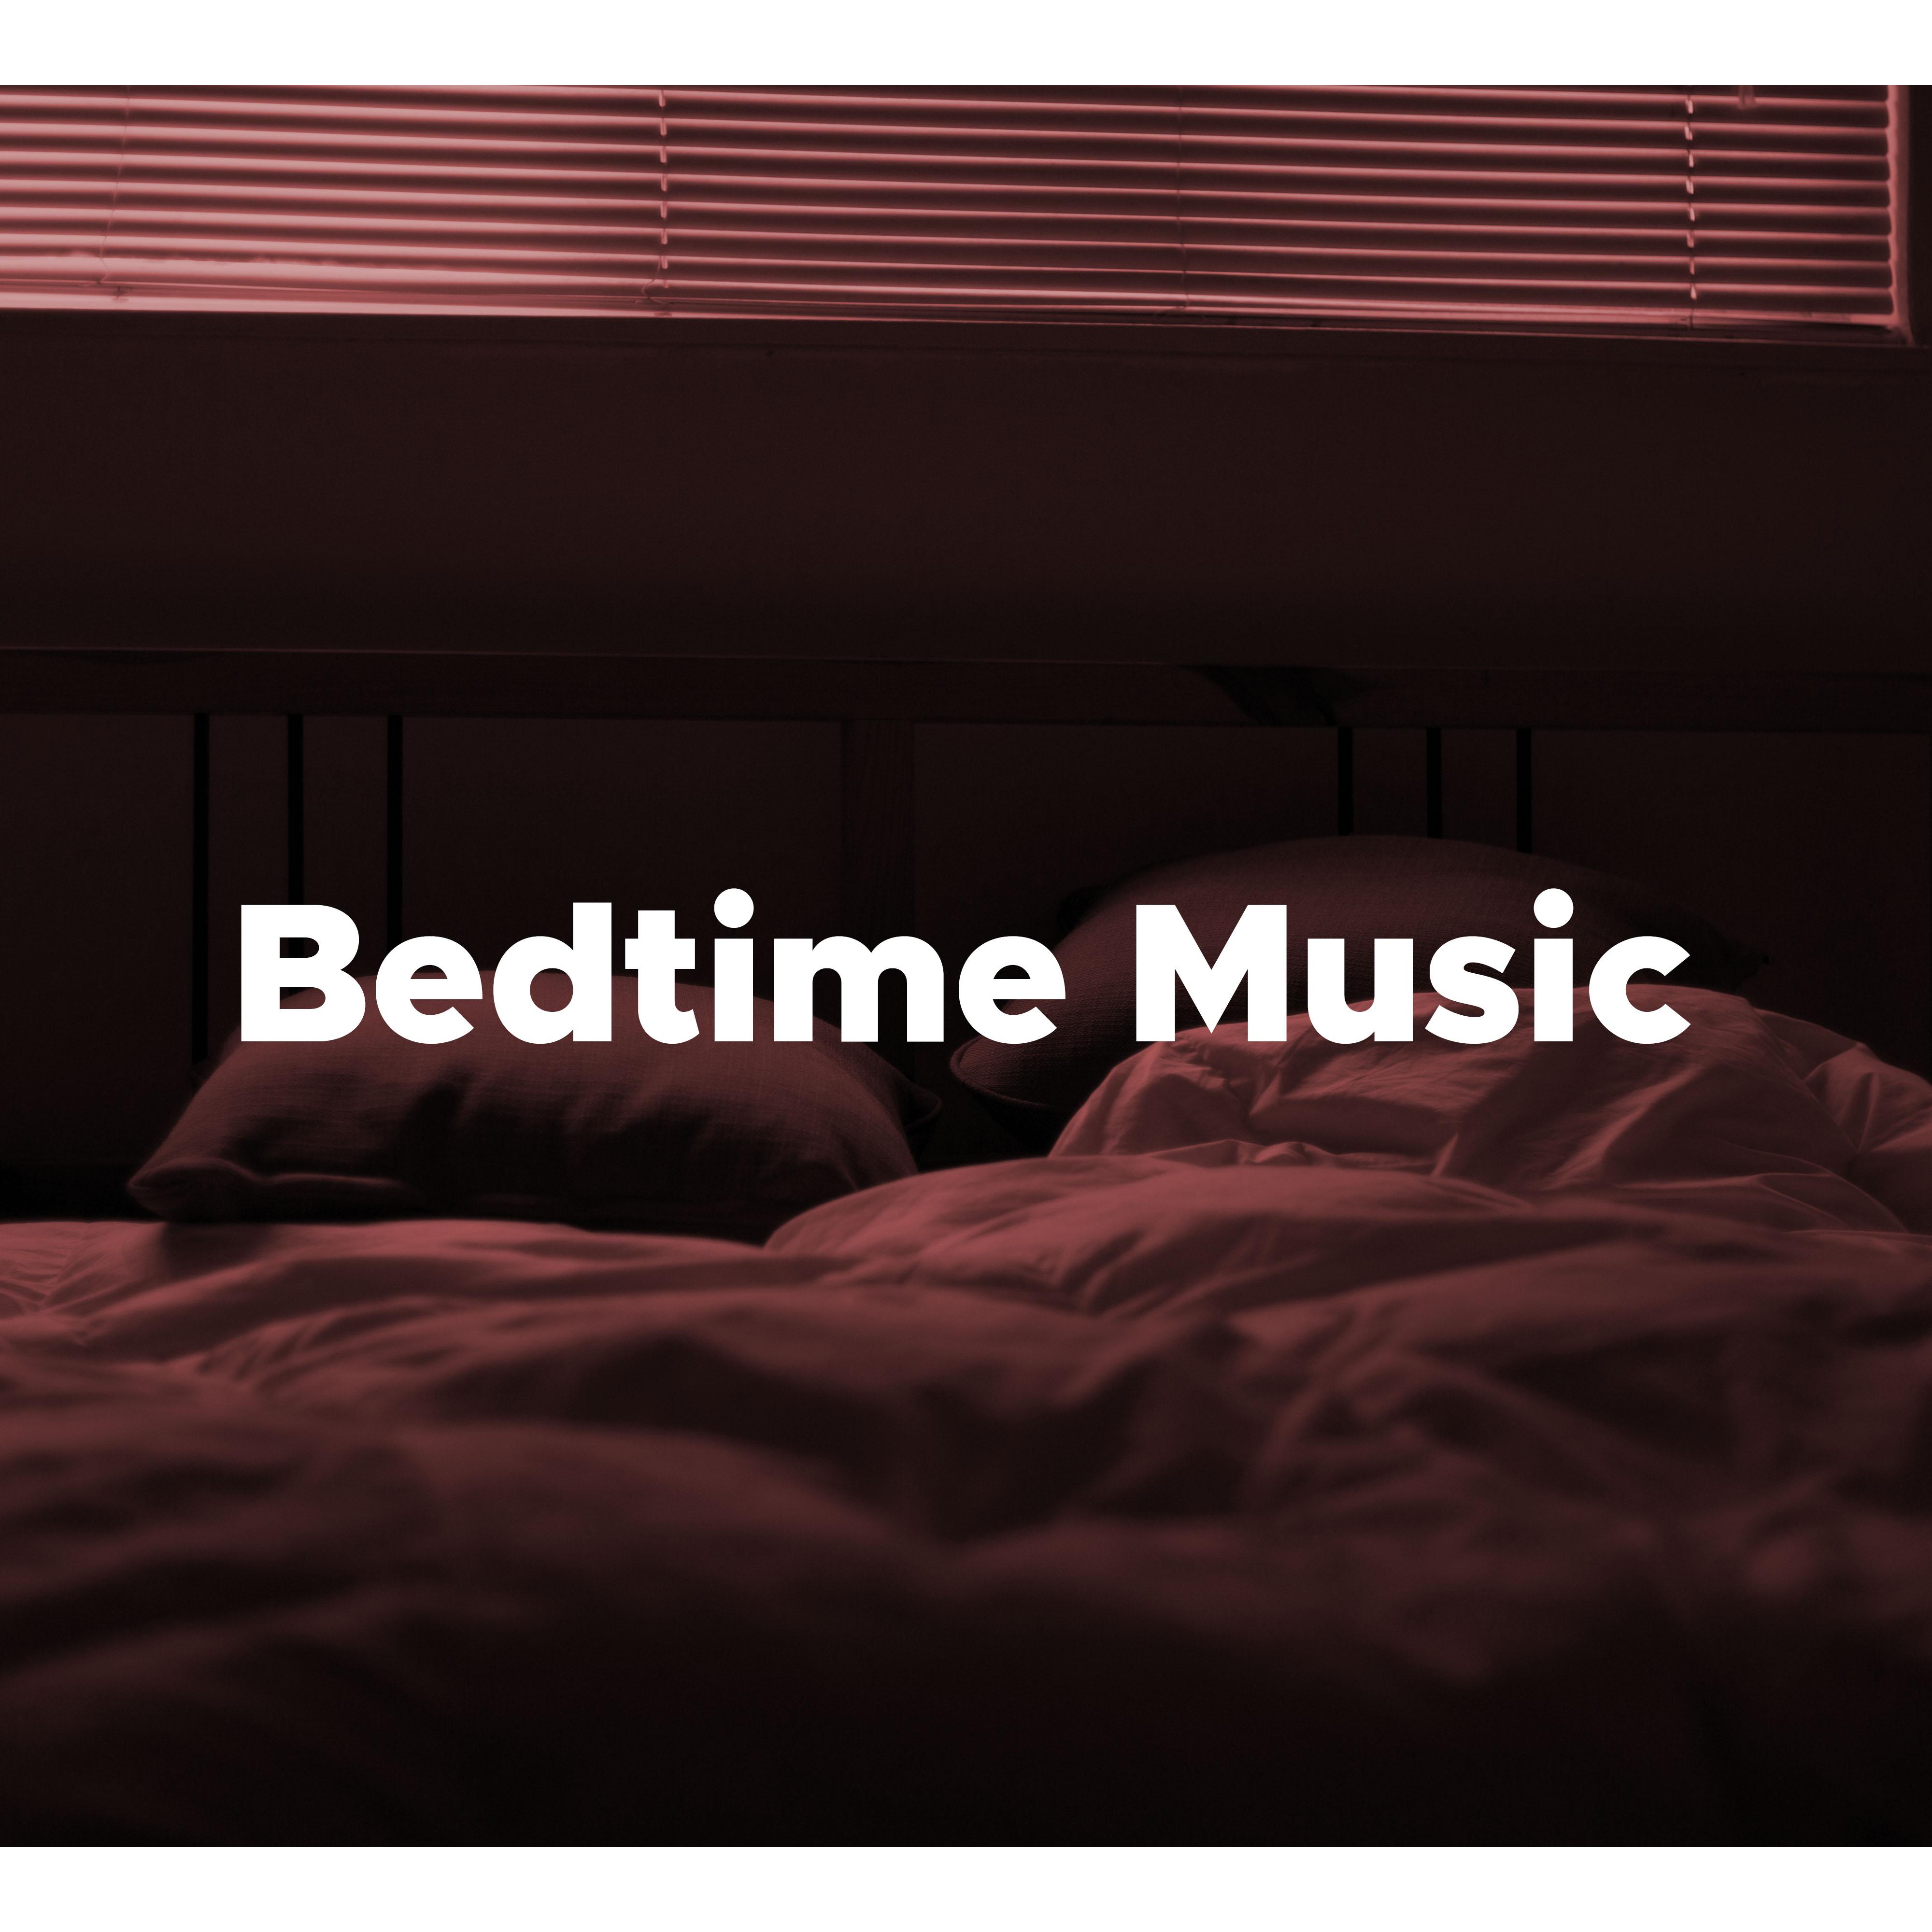 Bedtime Music: Music to Help you Sleep with Nature Sounds